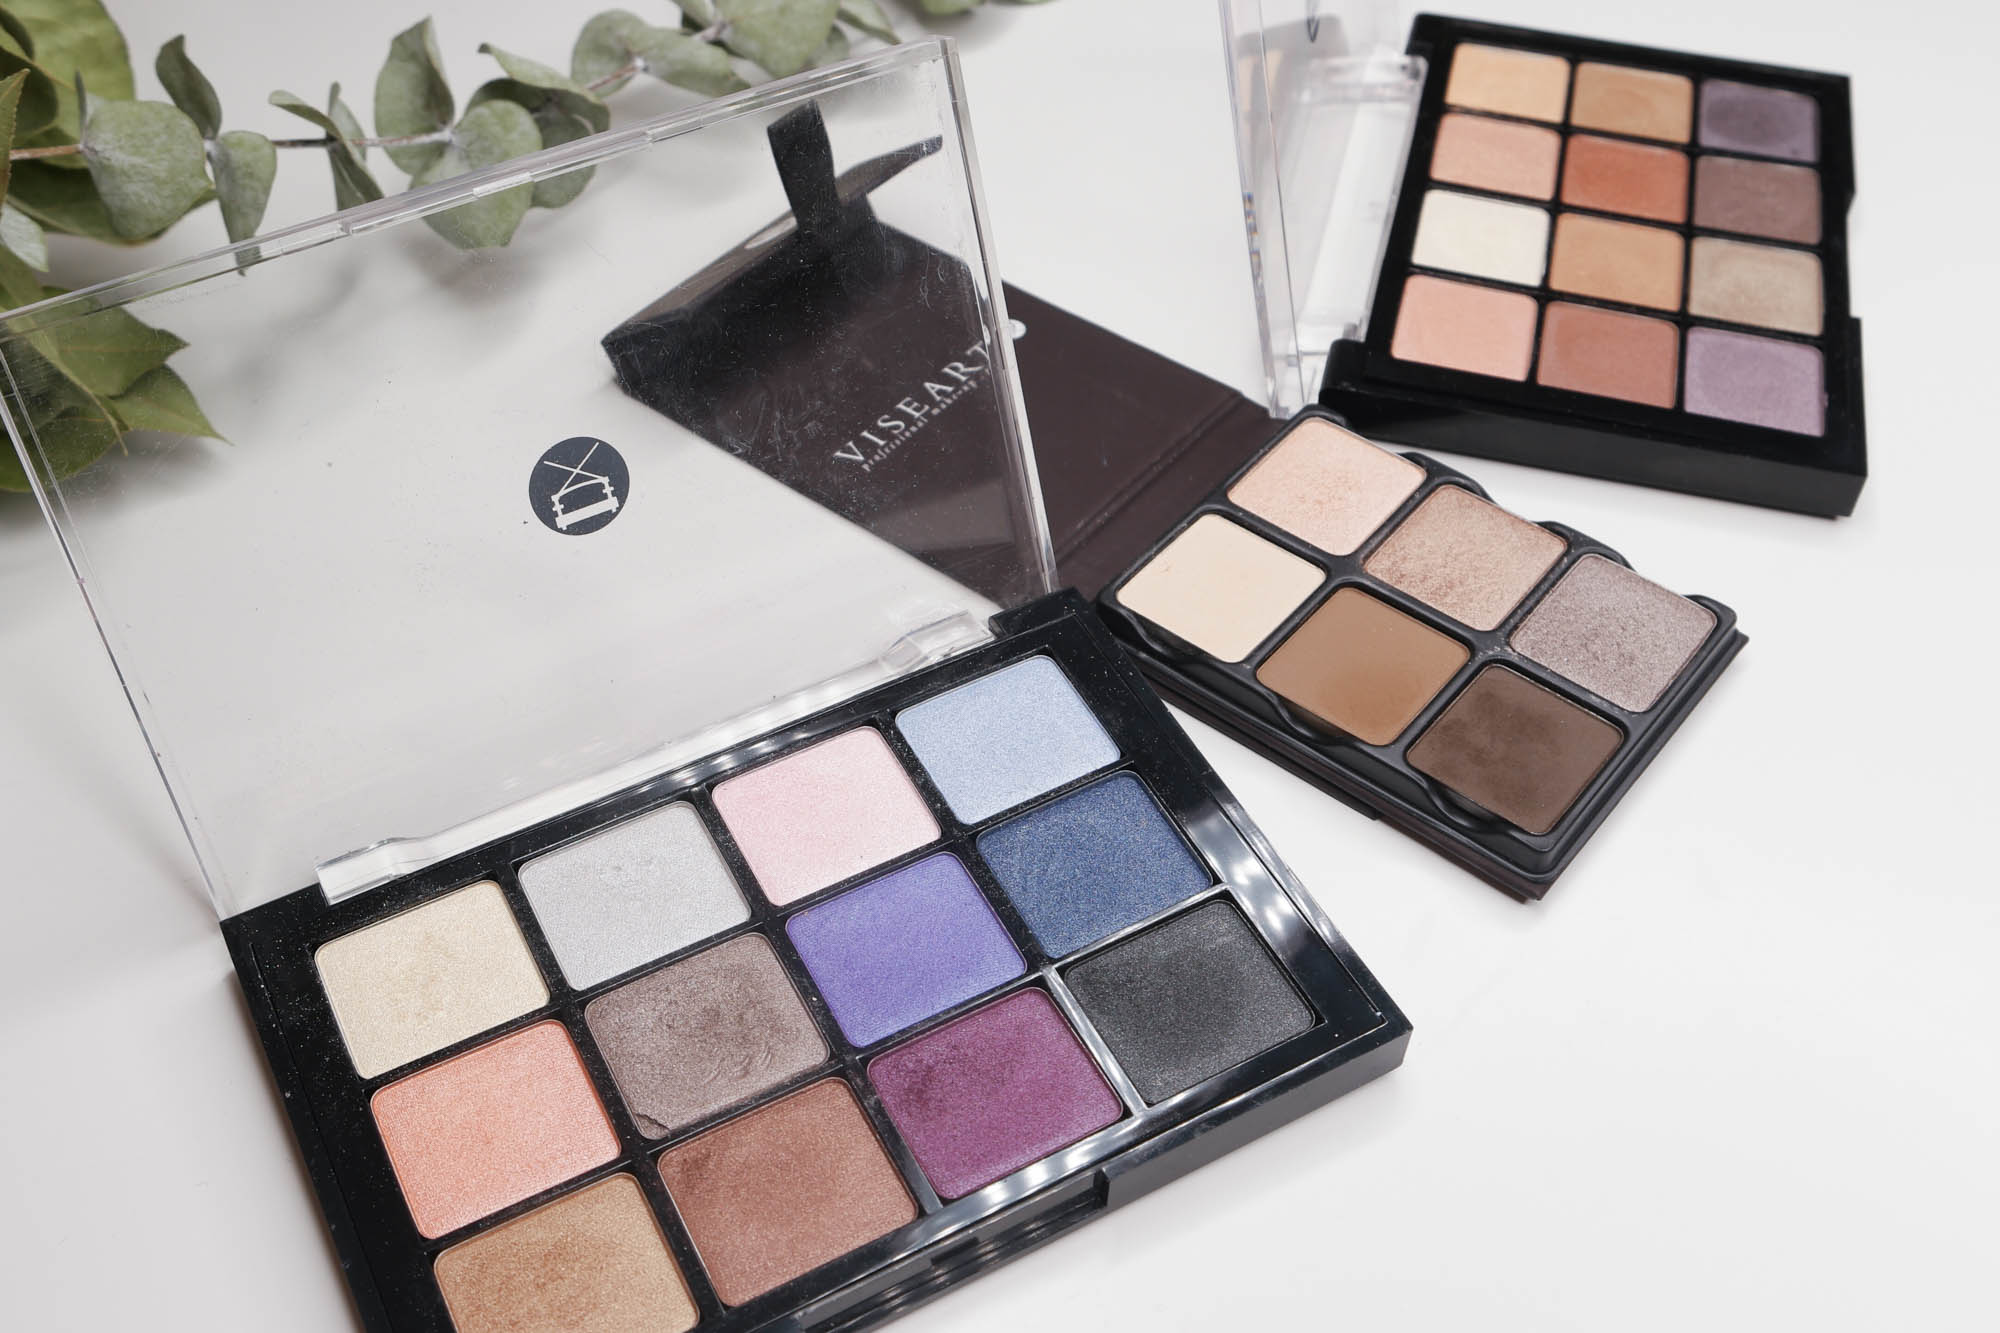 Review: Viseart Eyeshadow Palettes